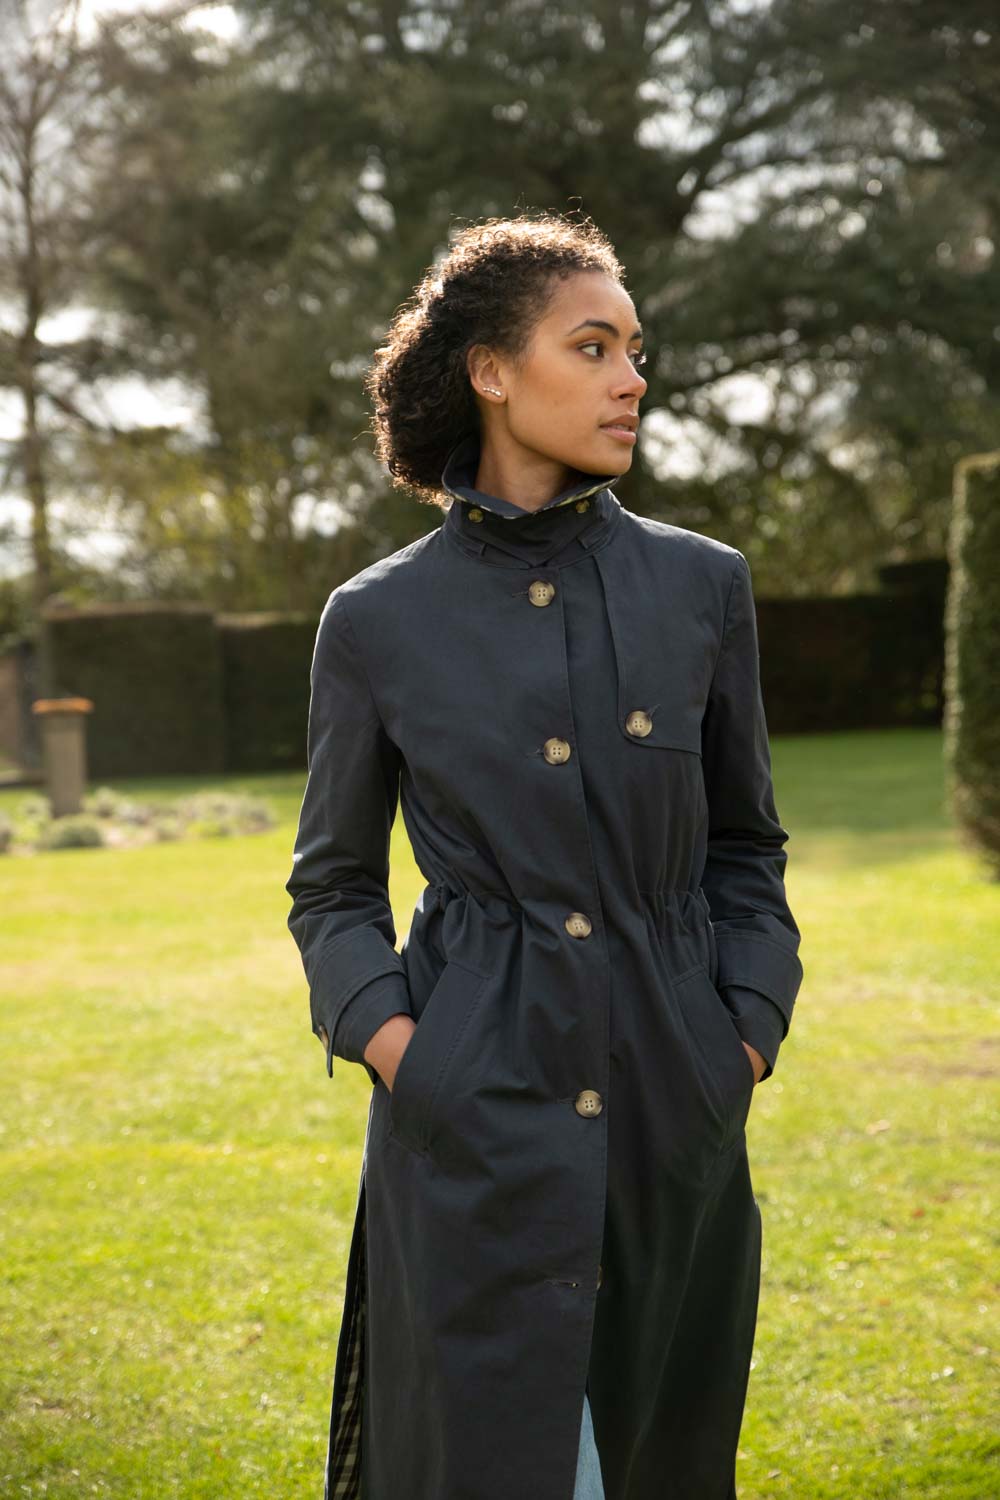 Classic Ladies British Trench Coat in Navy Blue Cotton with a Contrast Check Lining